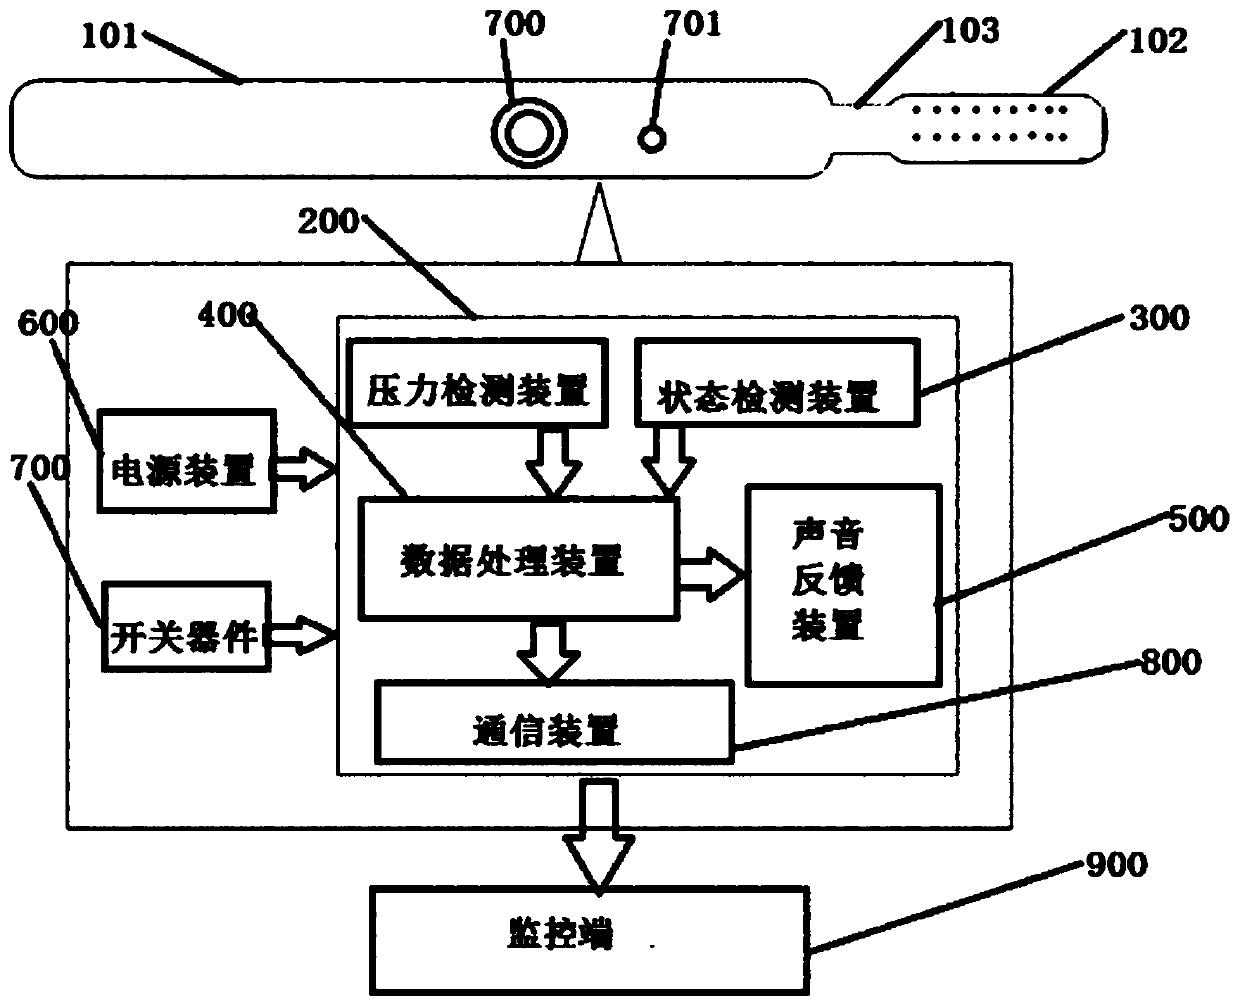 Toothbrush system and toothbrush system scoring and monitoring method